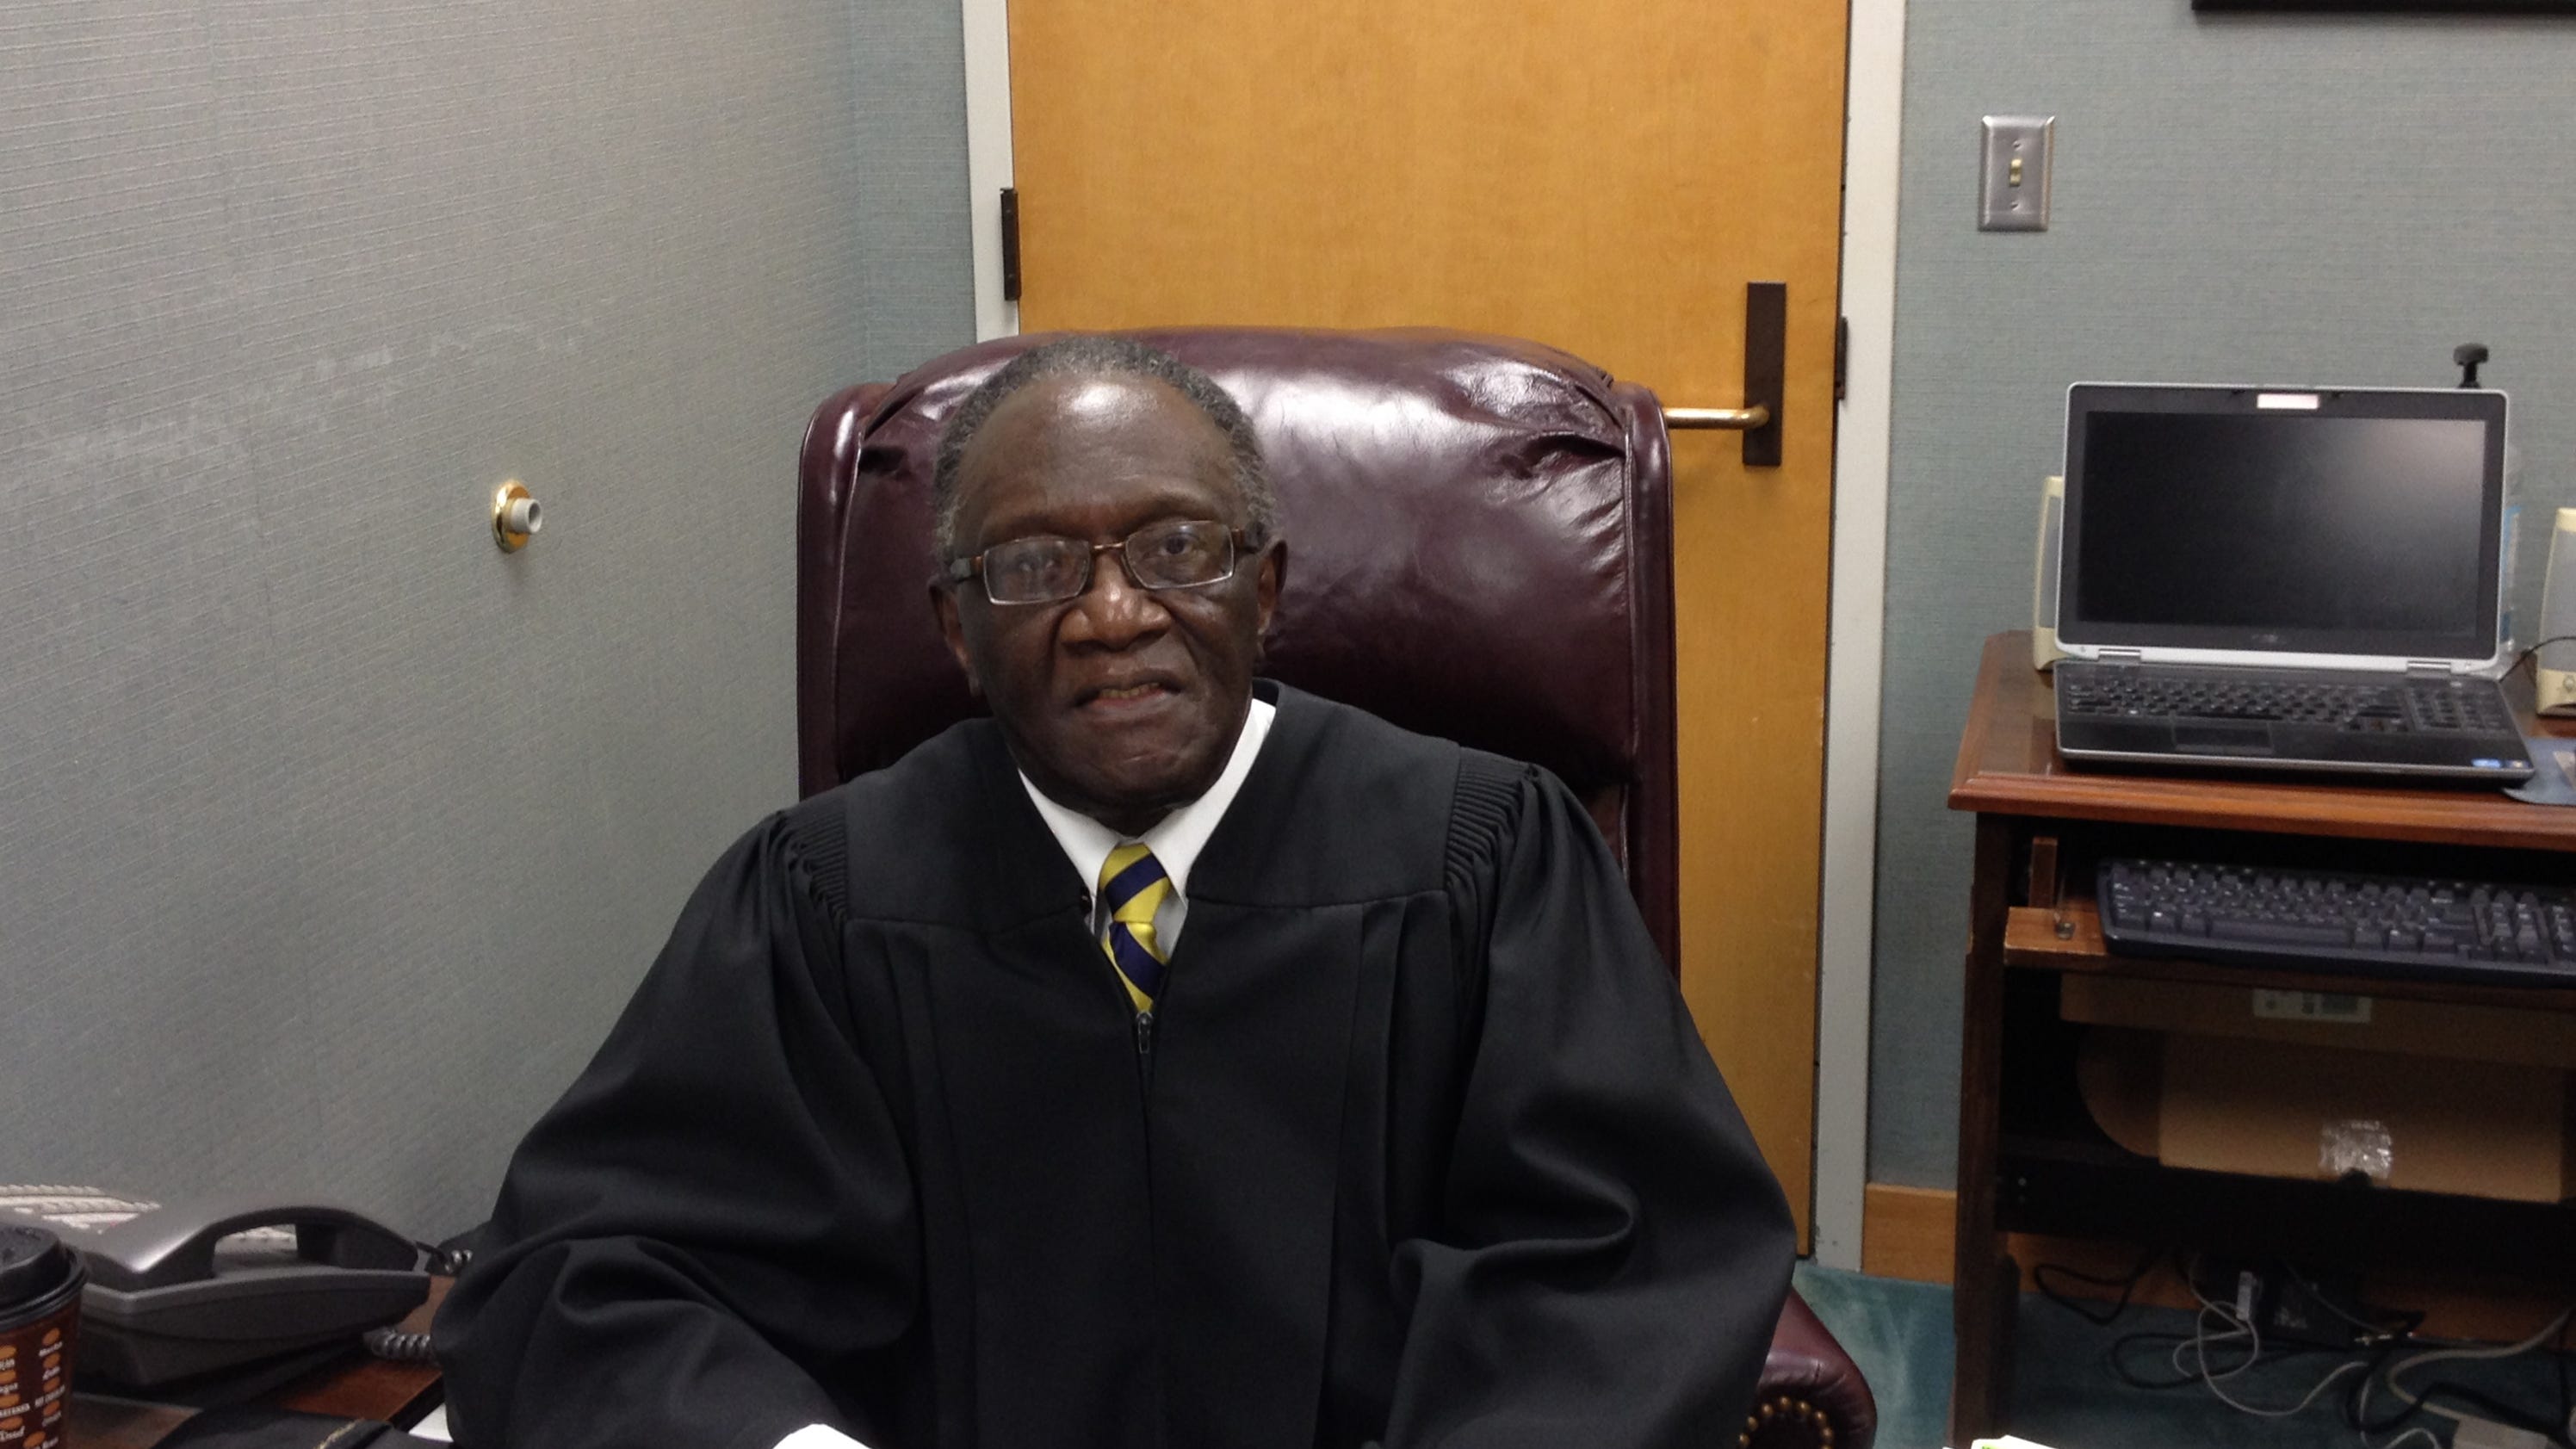 Family Court Judge Robert Jenkins reflects on his career